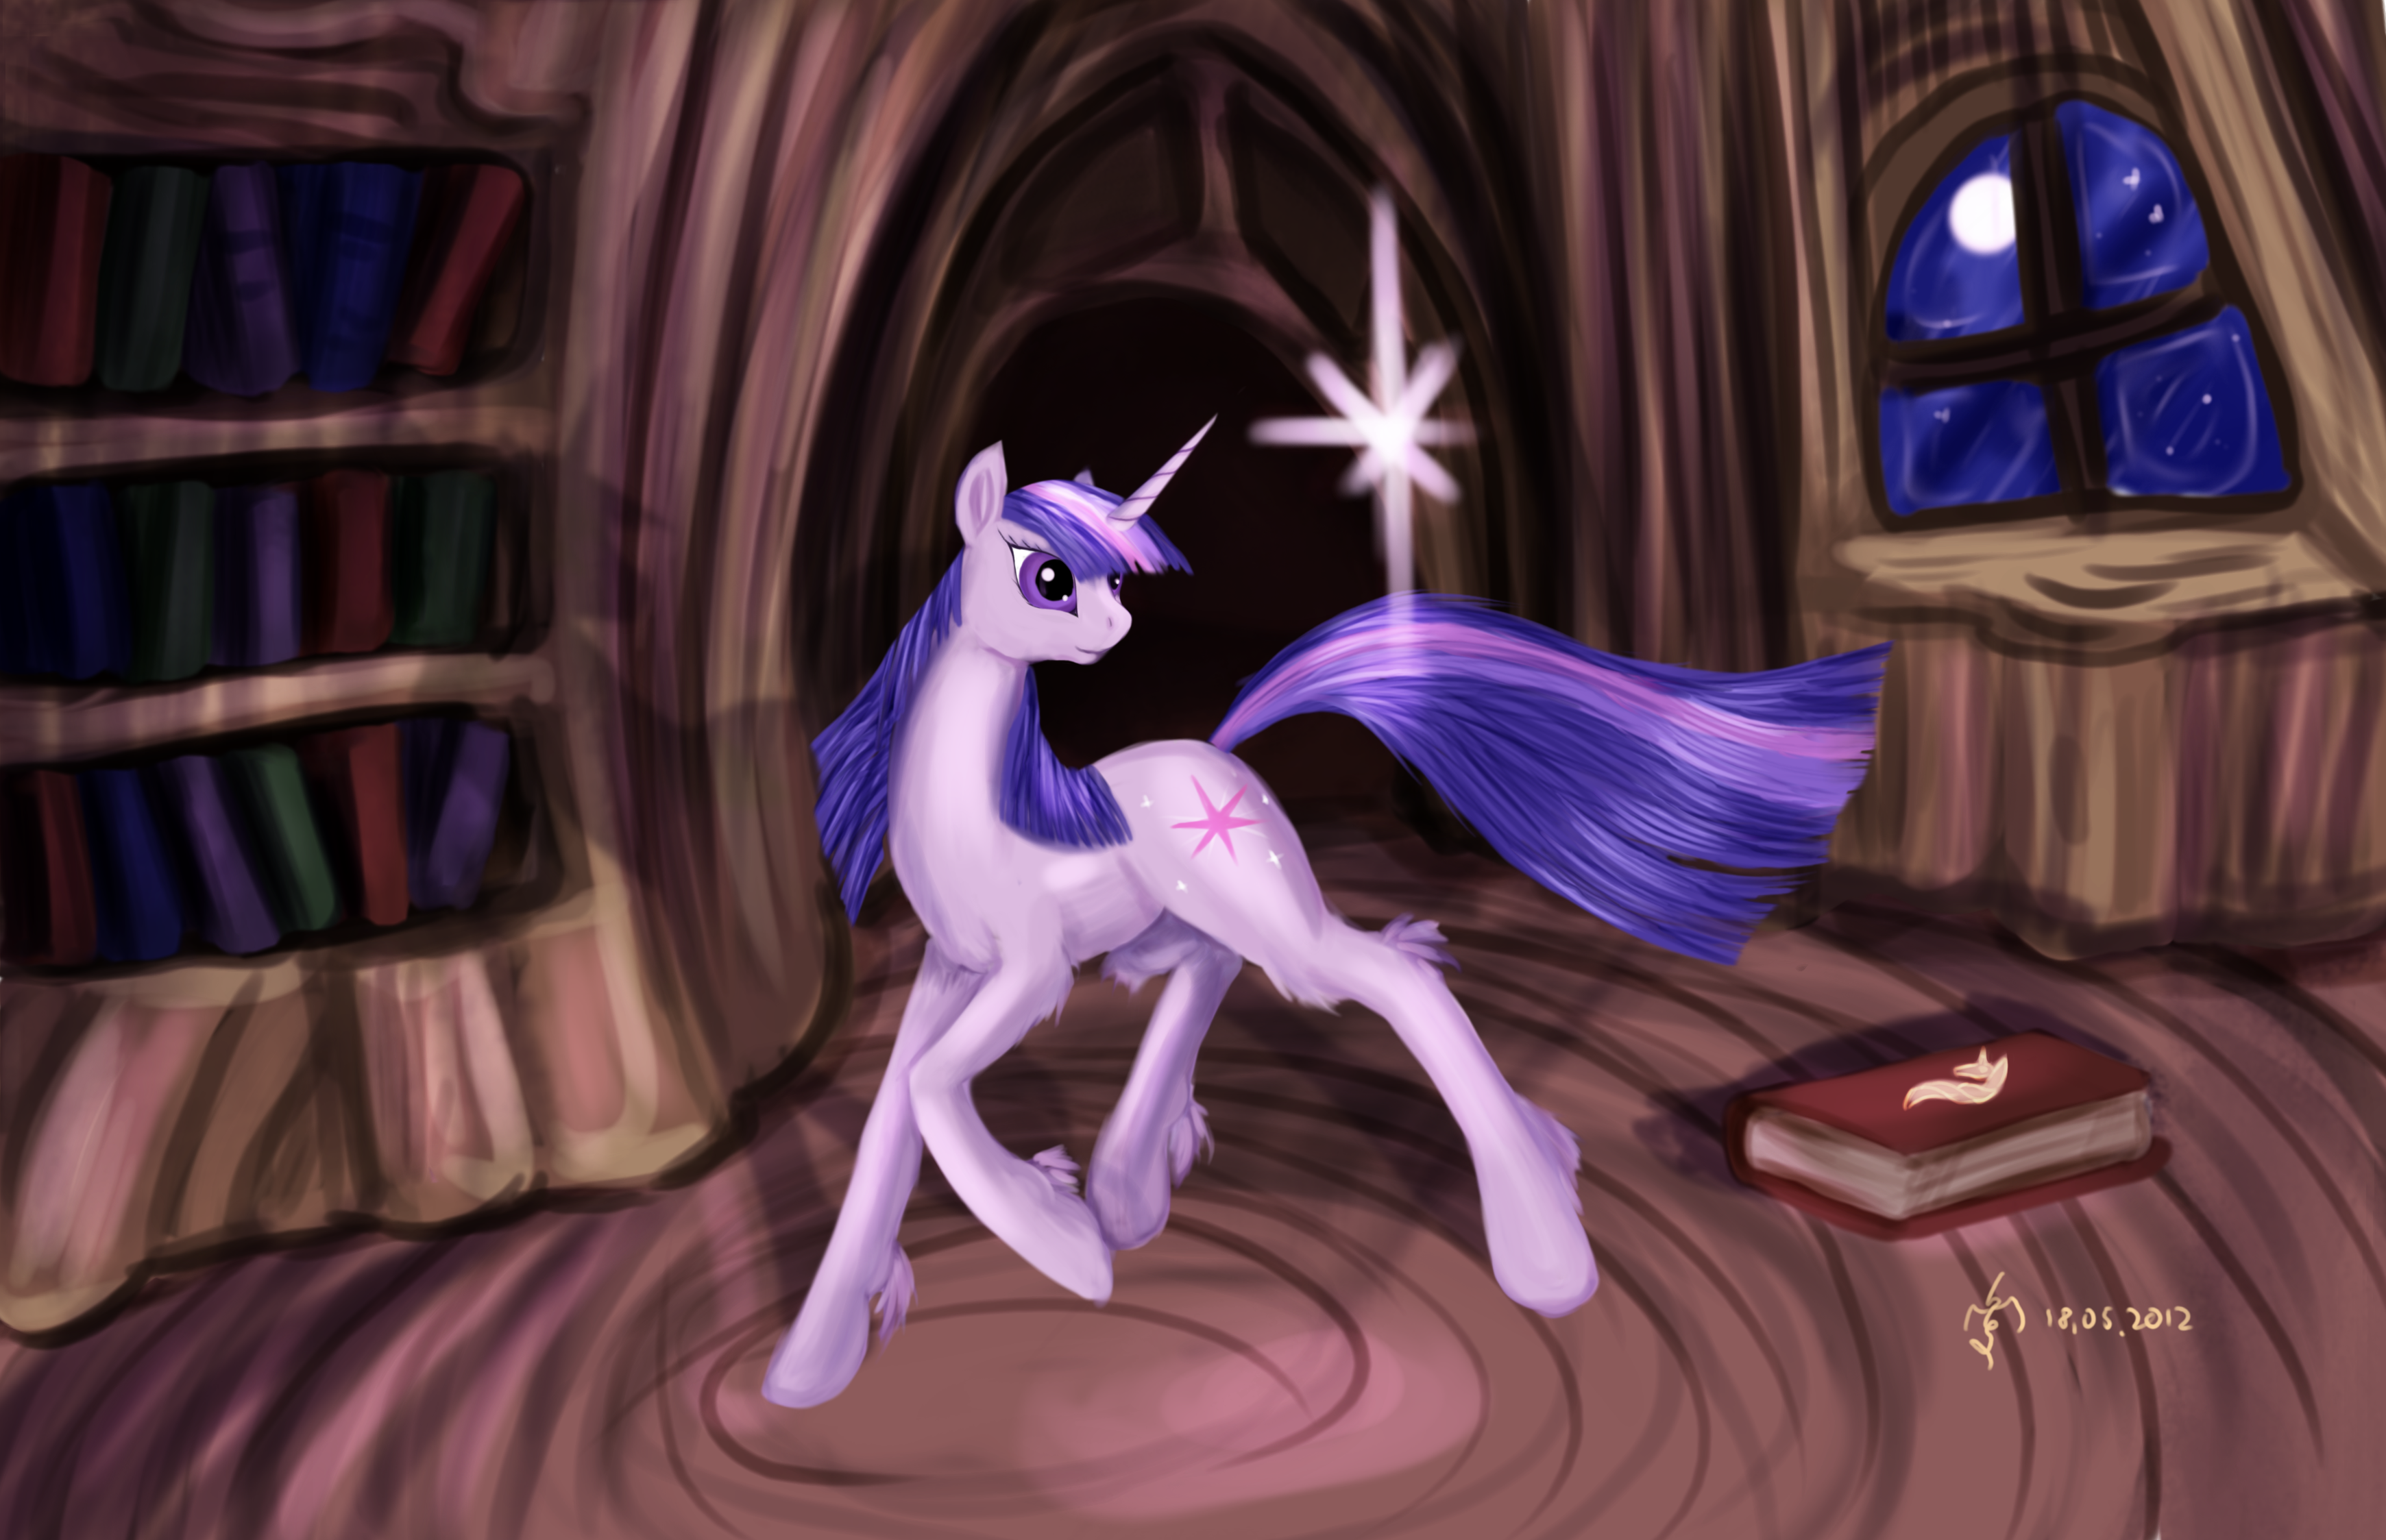 Twilight Sparkle is casts a spell by Dalagar